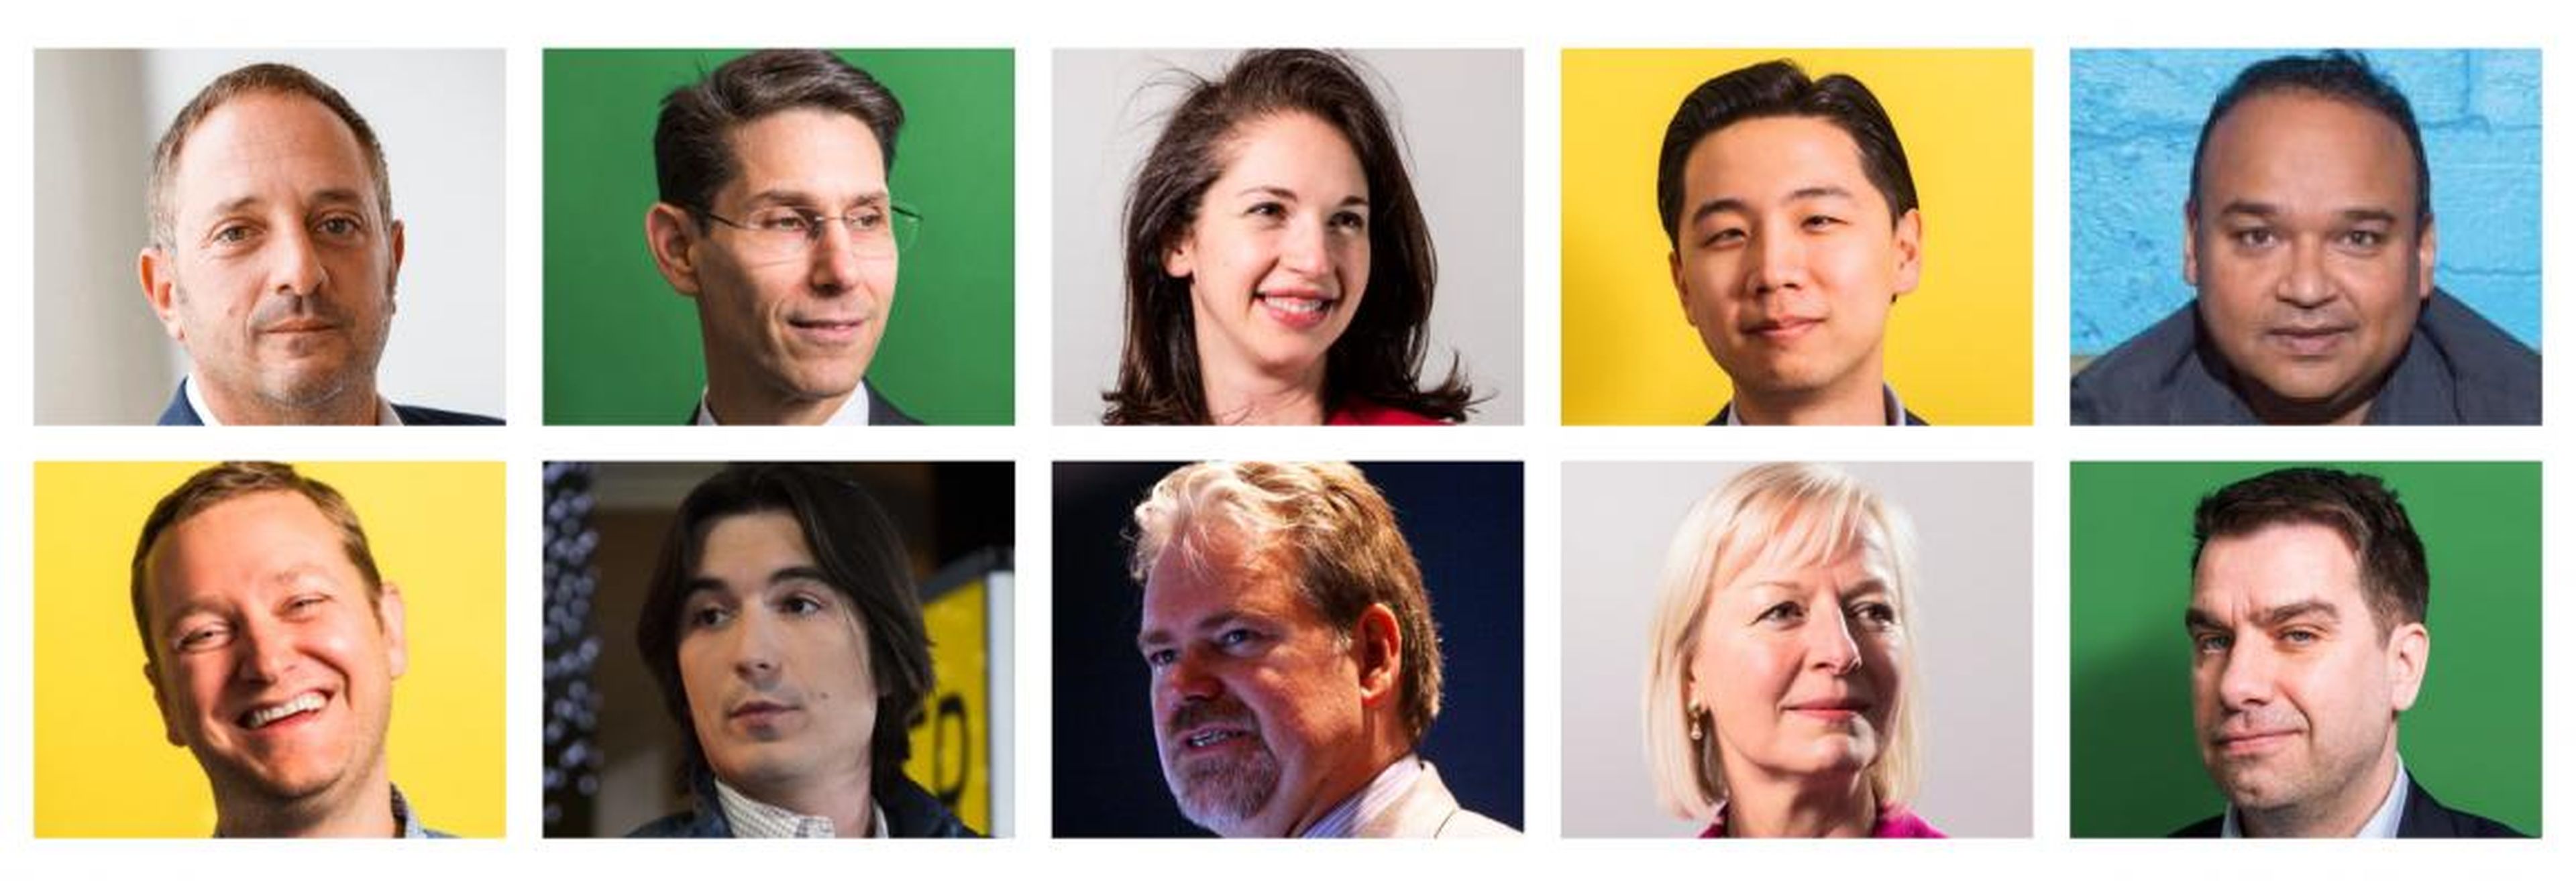 INTRODUCING: The 10 people transforming investing